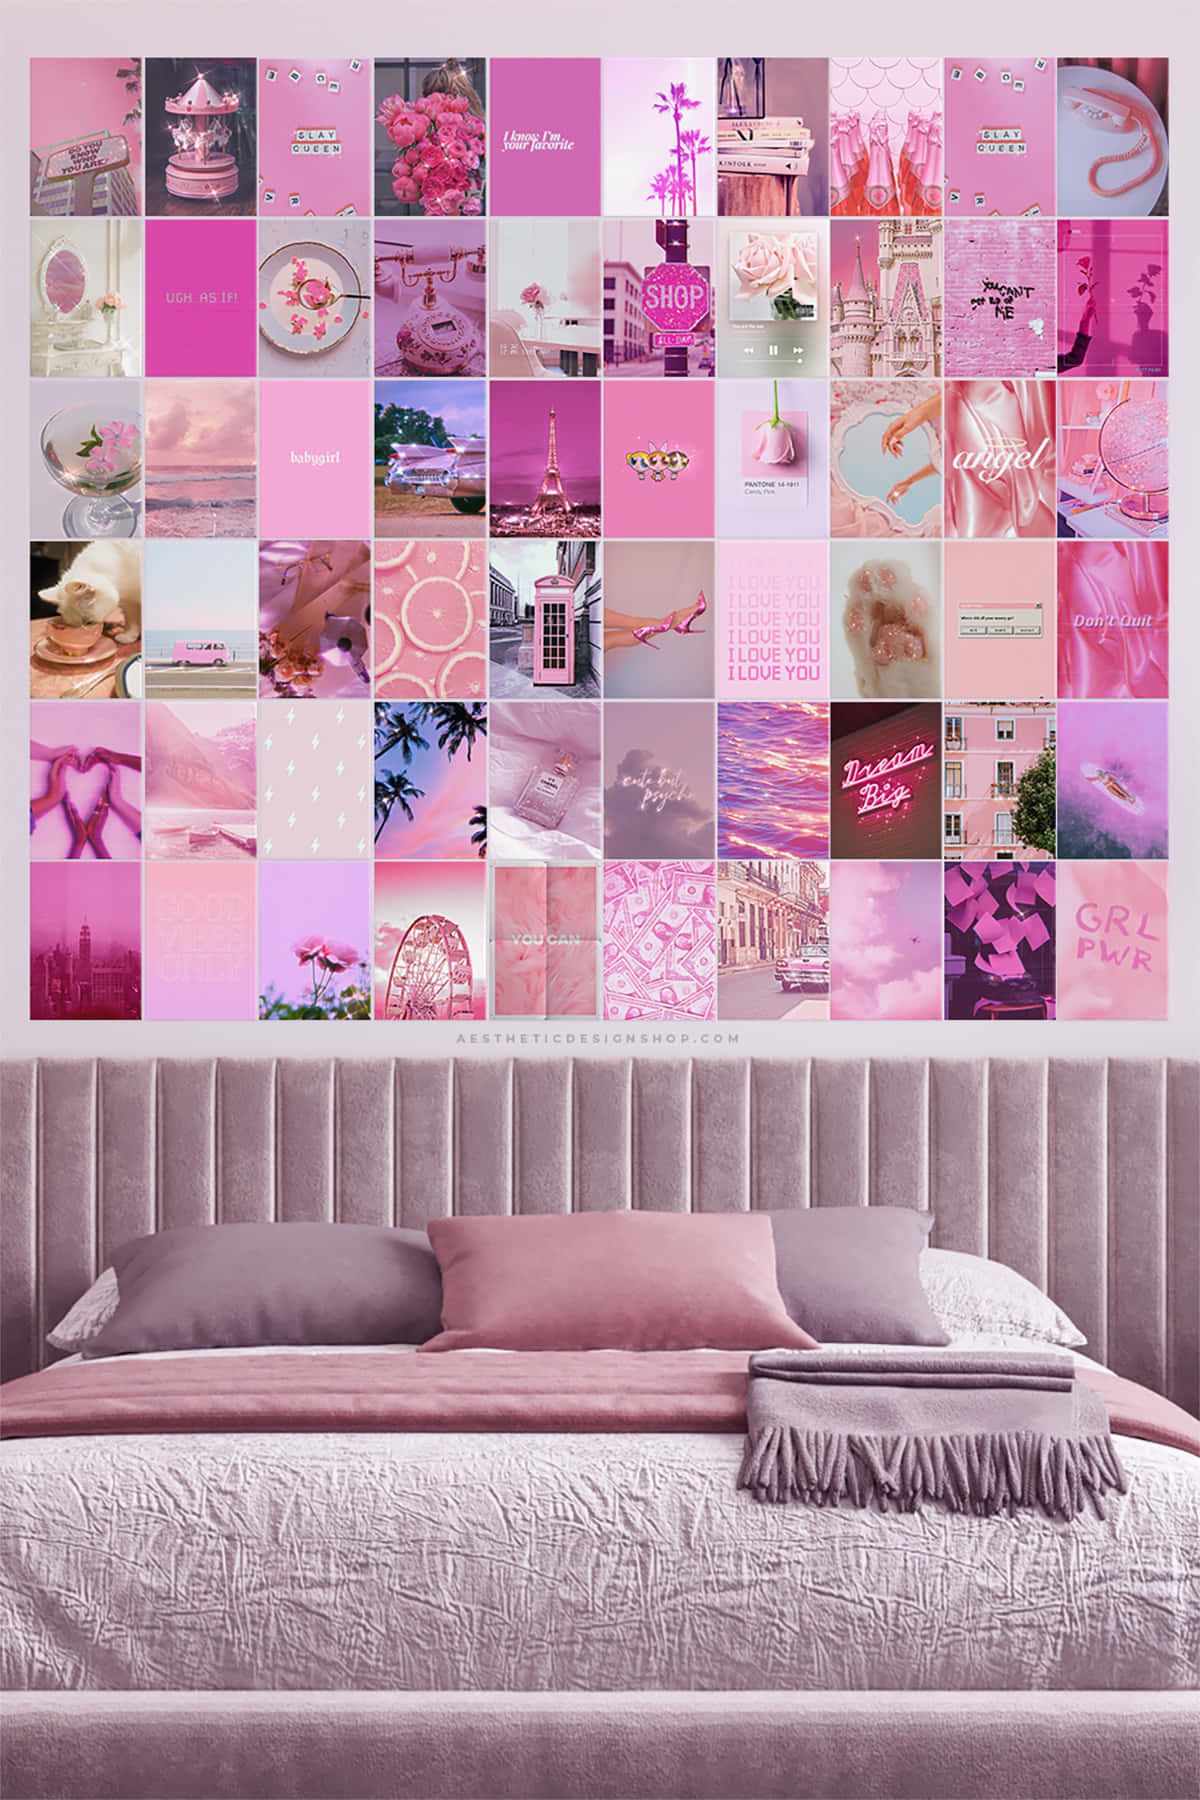 Brighten up any room with this stylish Wall Collage